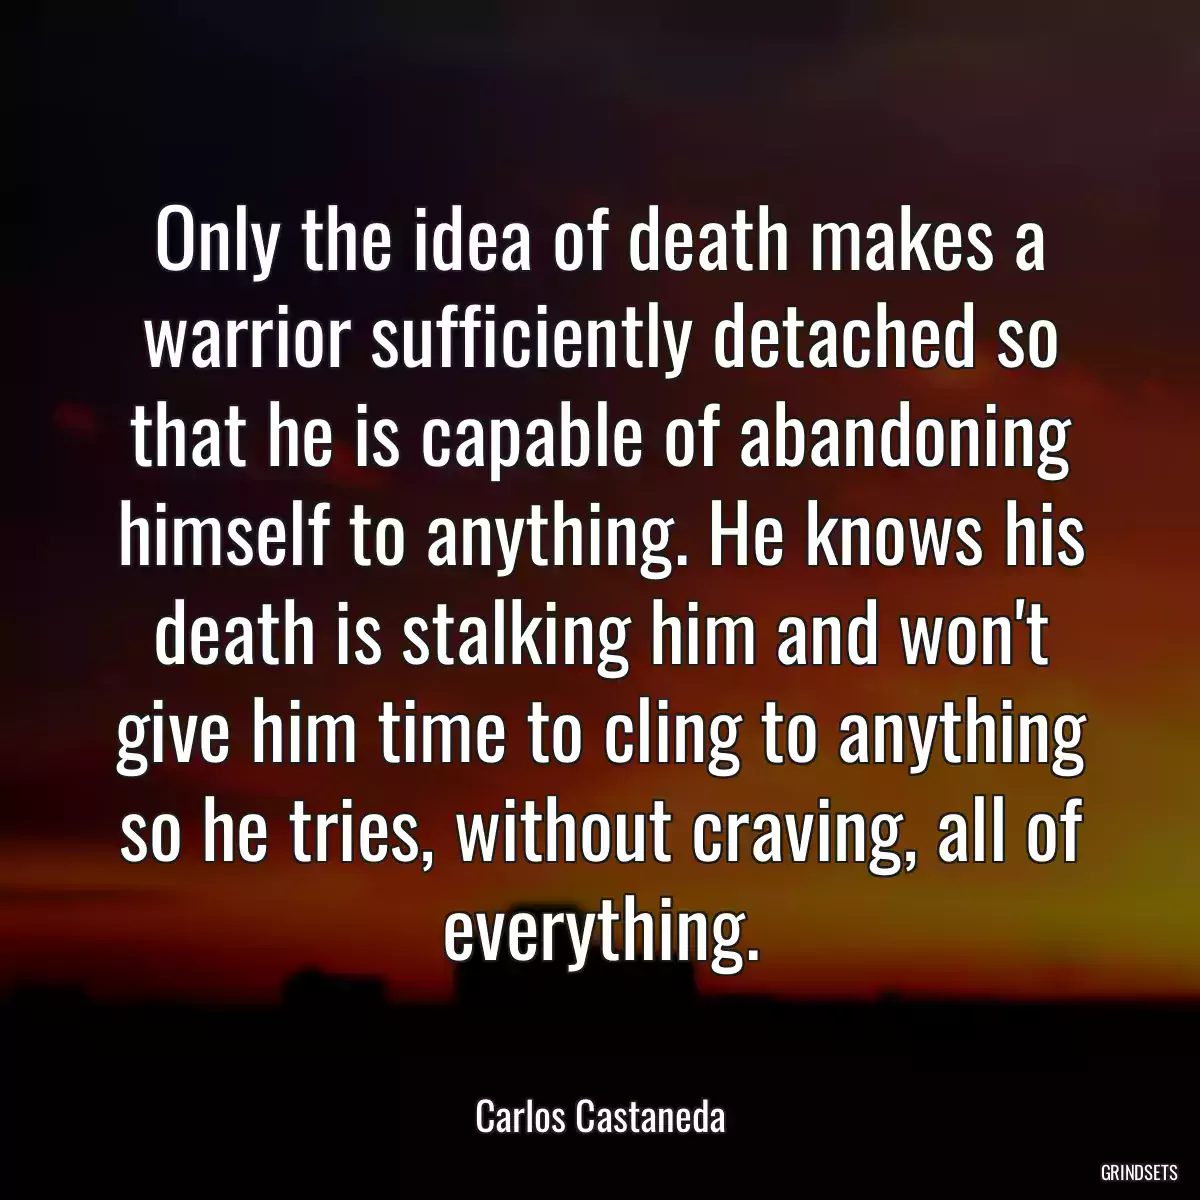 Only the idea of death makes a warrior sufficiently detached so that he is capable of abandoning himself to anything. He knows his death is stalking him and won\'t give him time to cling to anything so he tries, without craving, all of everything.